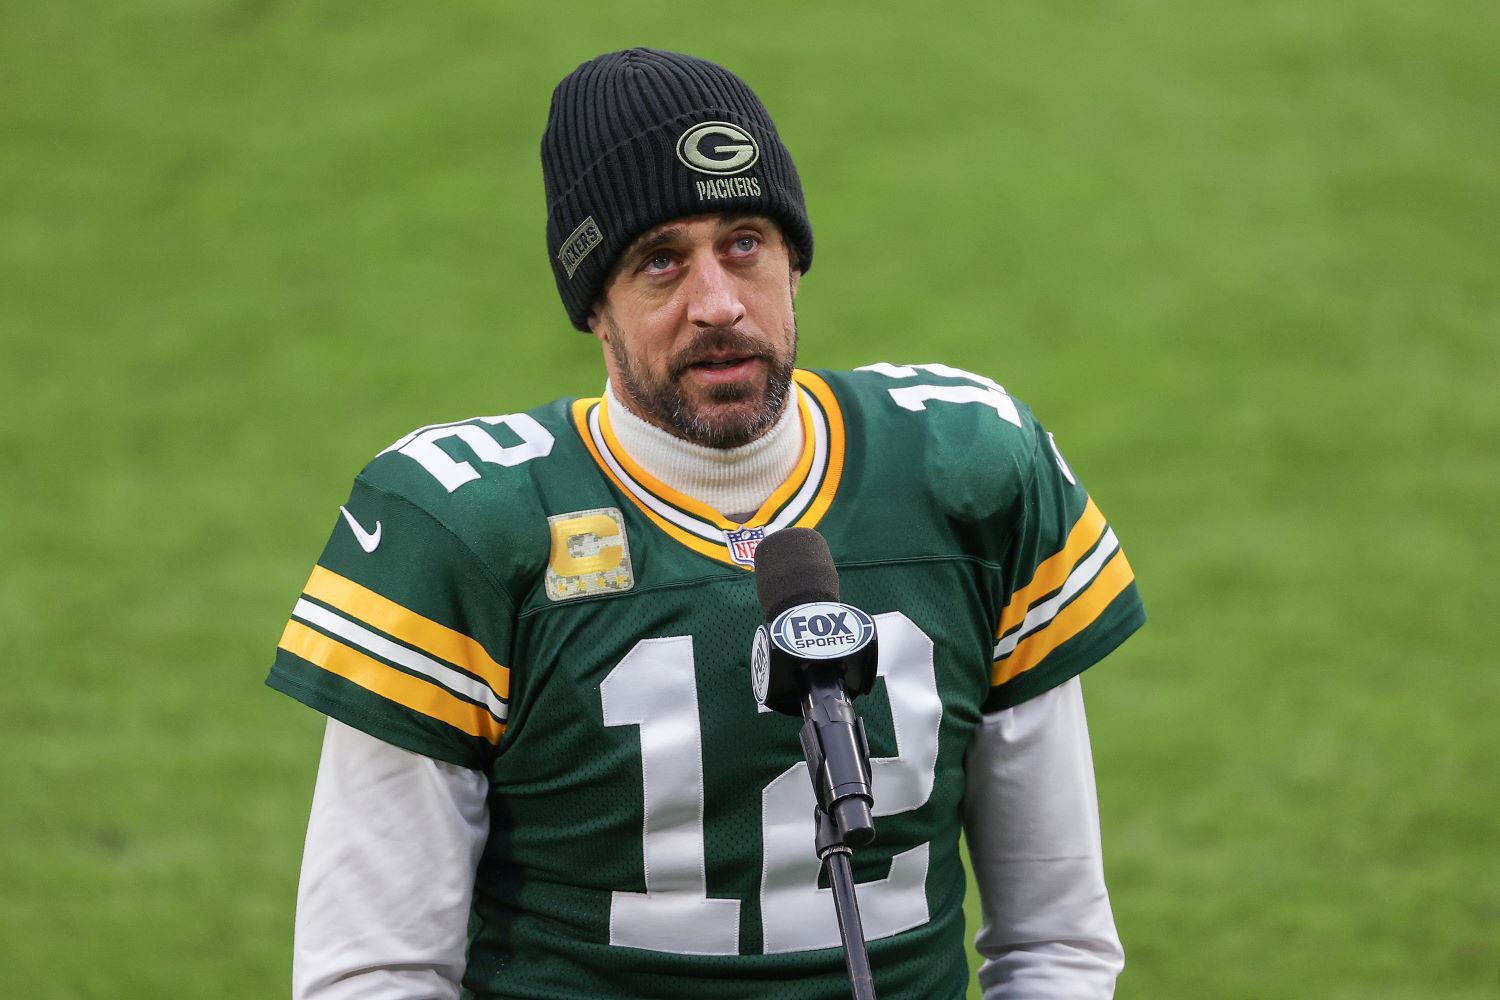 Despite coming off another crushing NFC championship loss, Aaron Rodgers somehow wants the Green Bay Packers to give him a new contract.